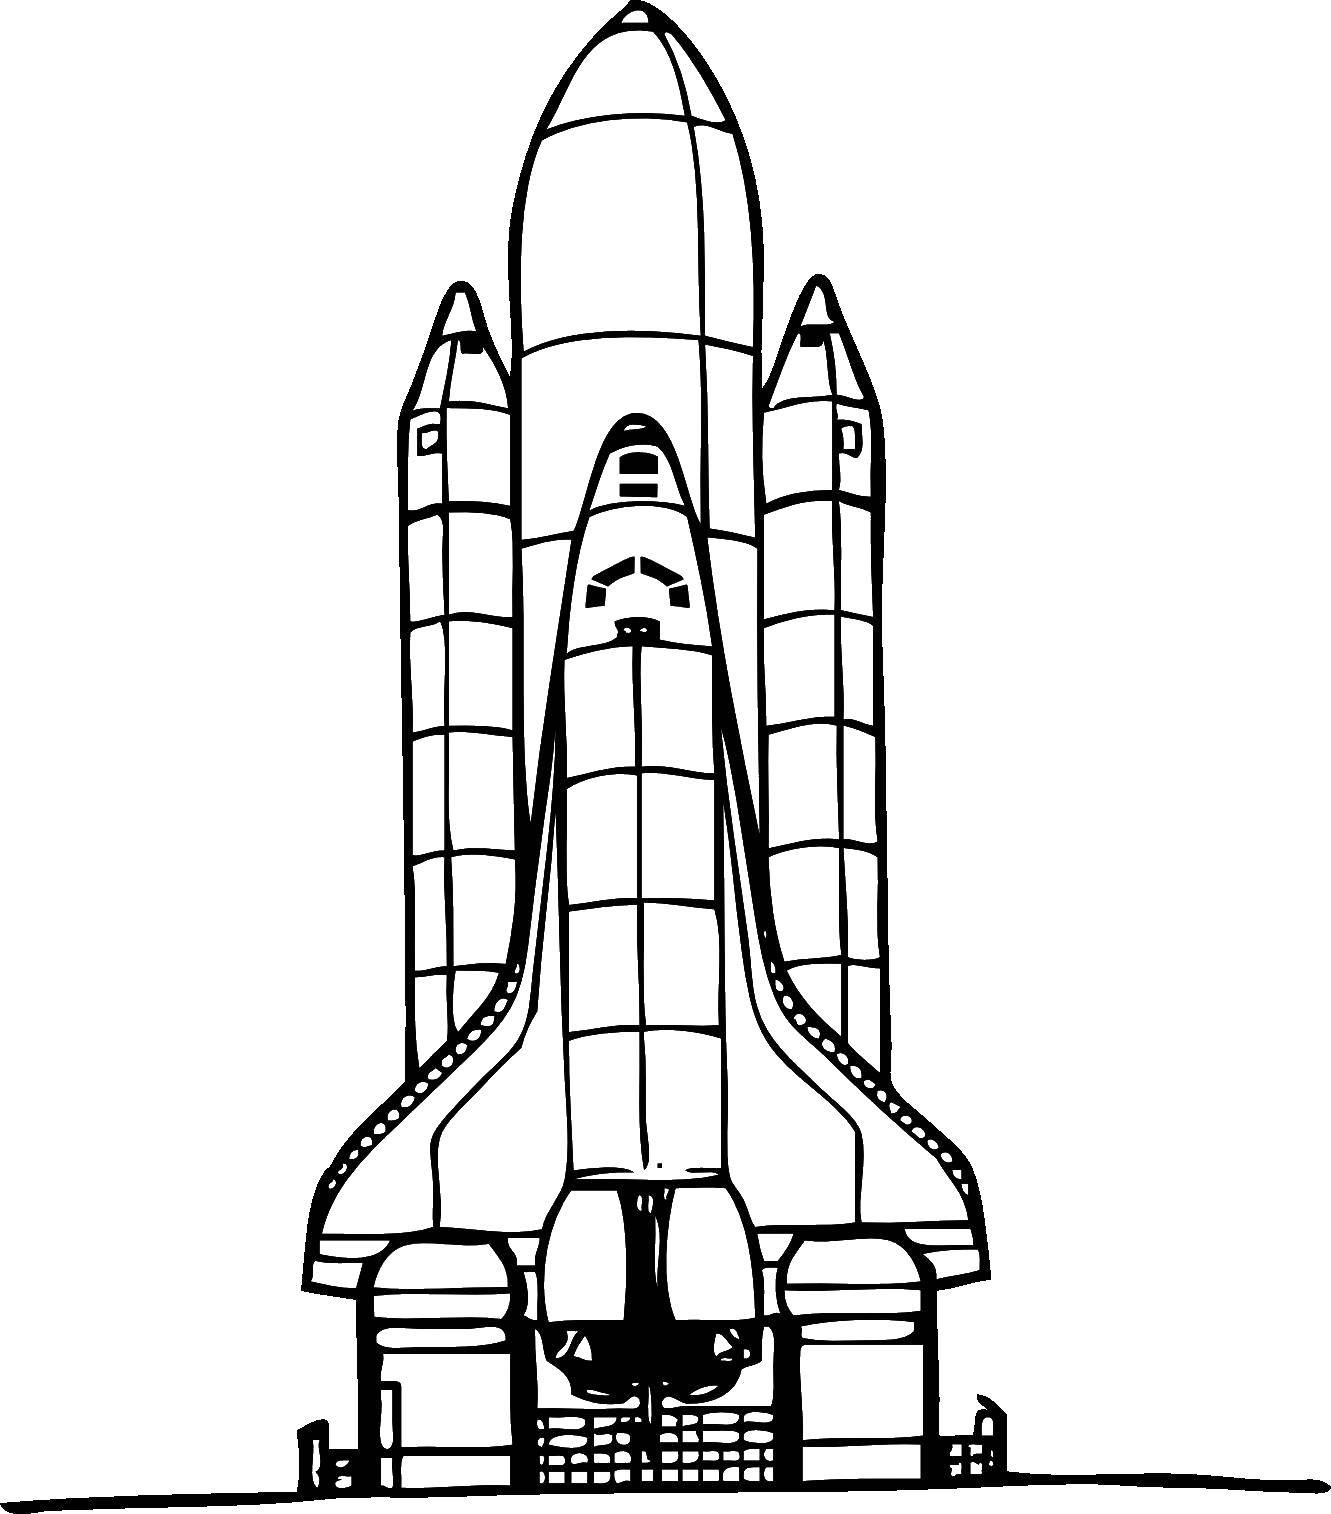 Coloring Rocket. Category Space. Tags:  space, rocket.